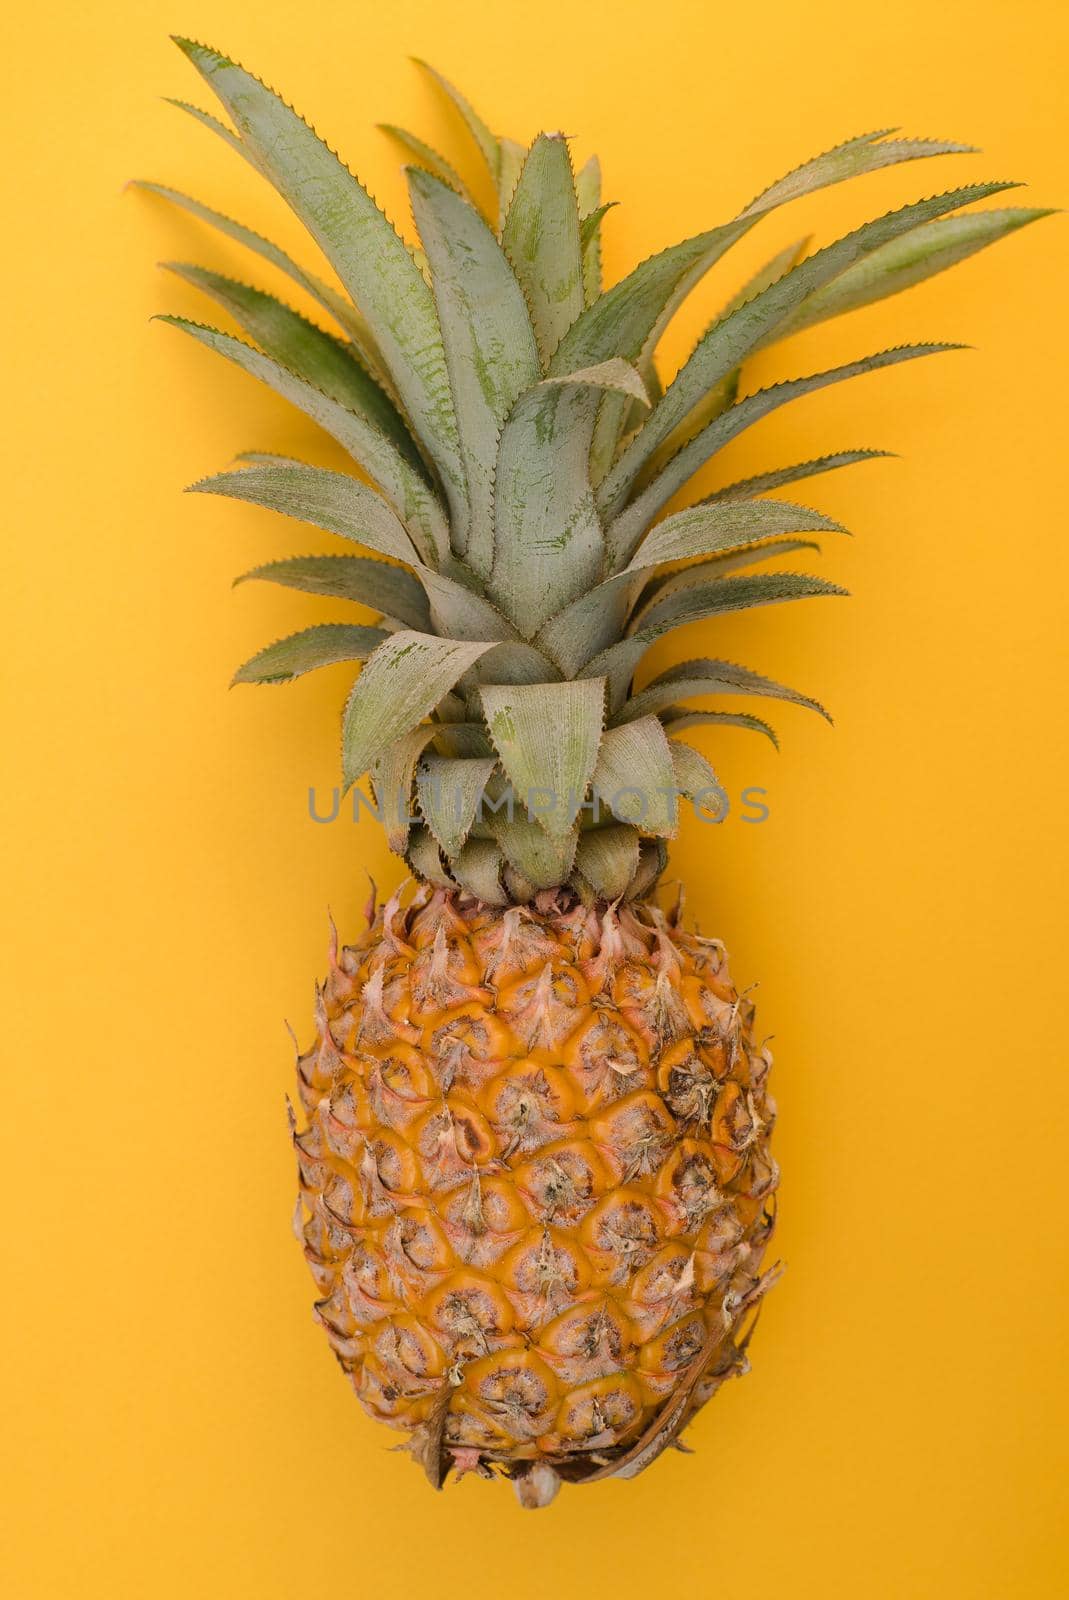 Thai pineapple on a yellow background by Zorgen